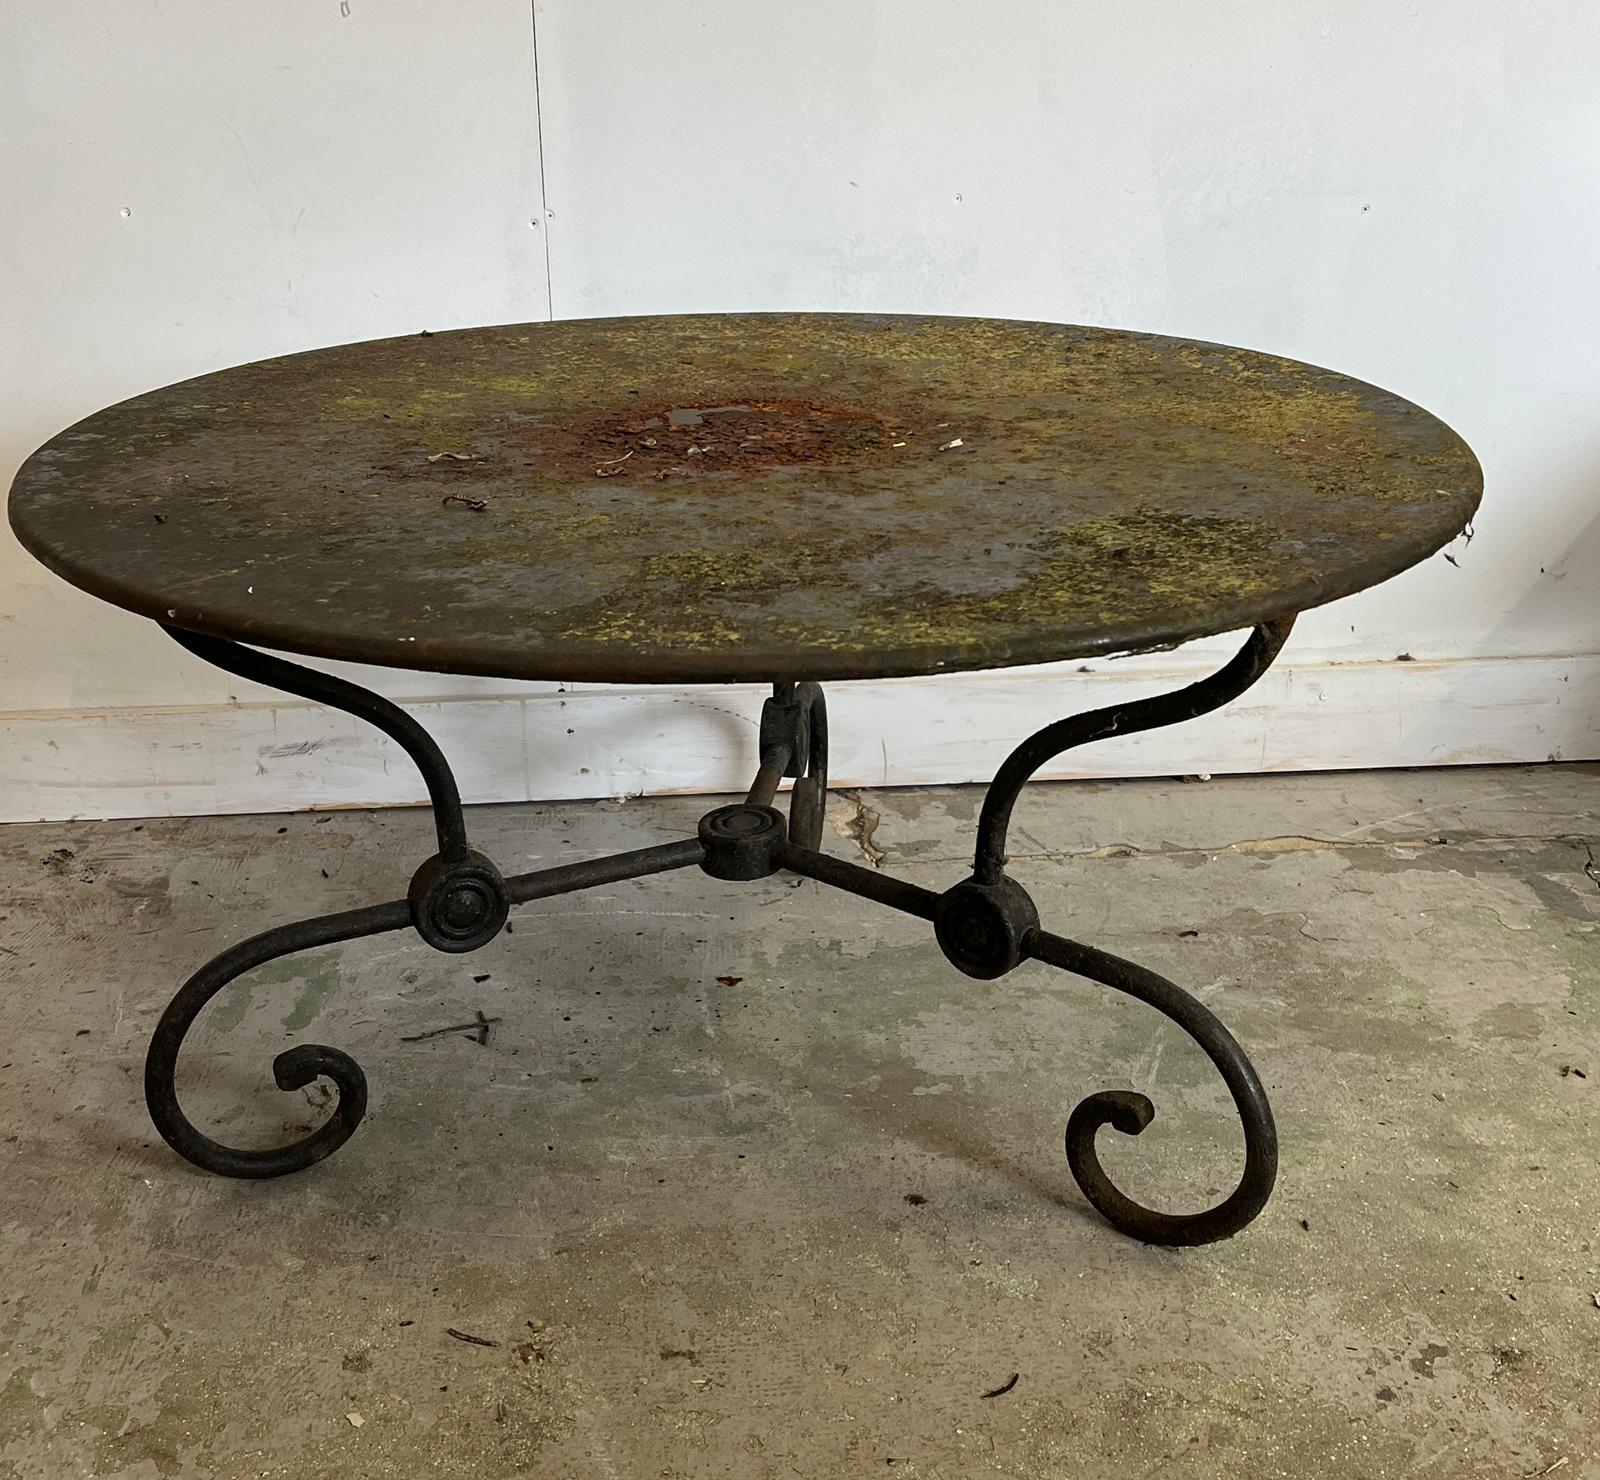 French style round decorative garden table with scrolling iron work legs (H54cm Dia100cm) - Image 2 of 4